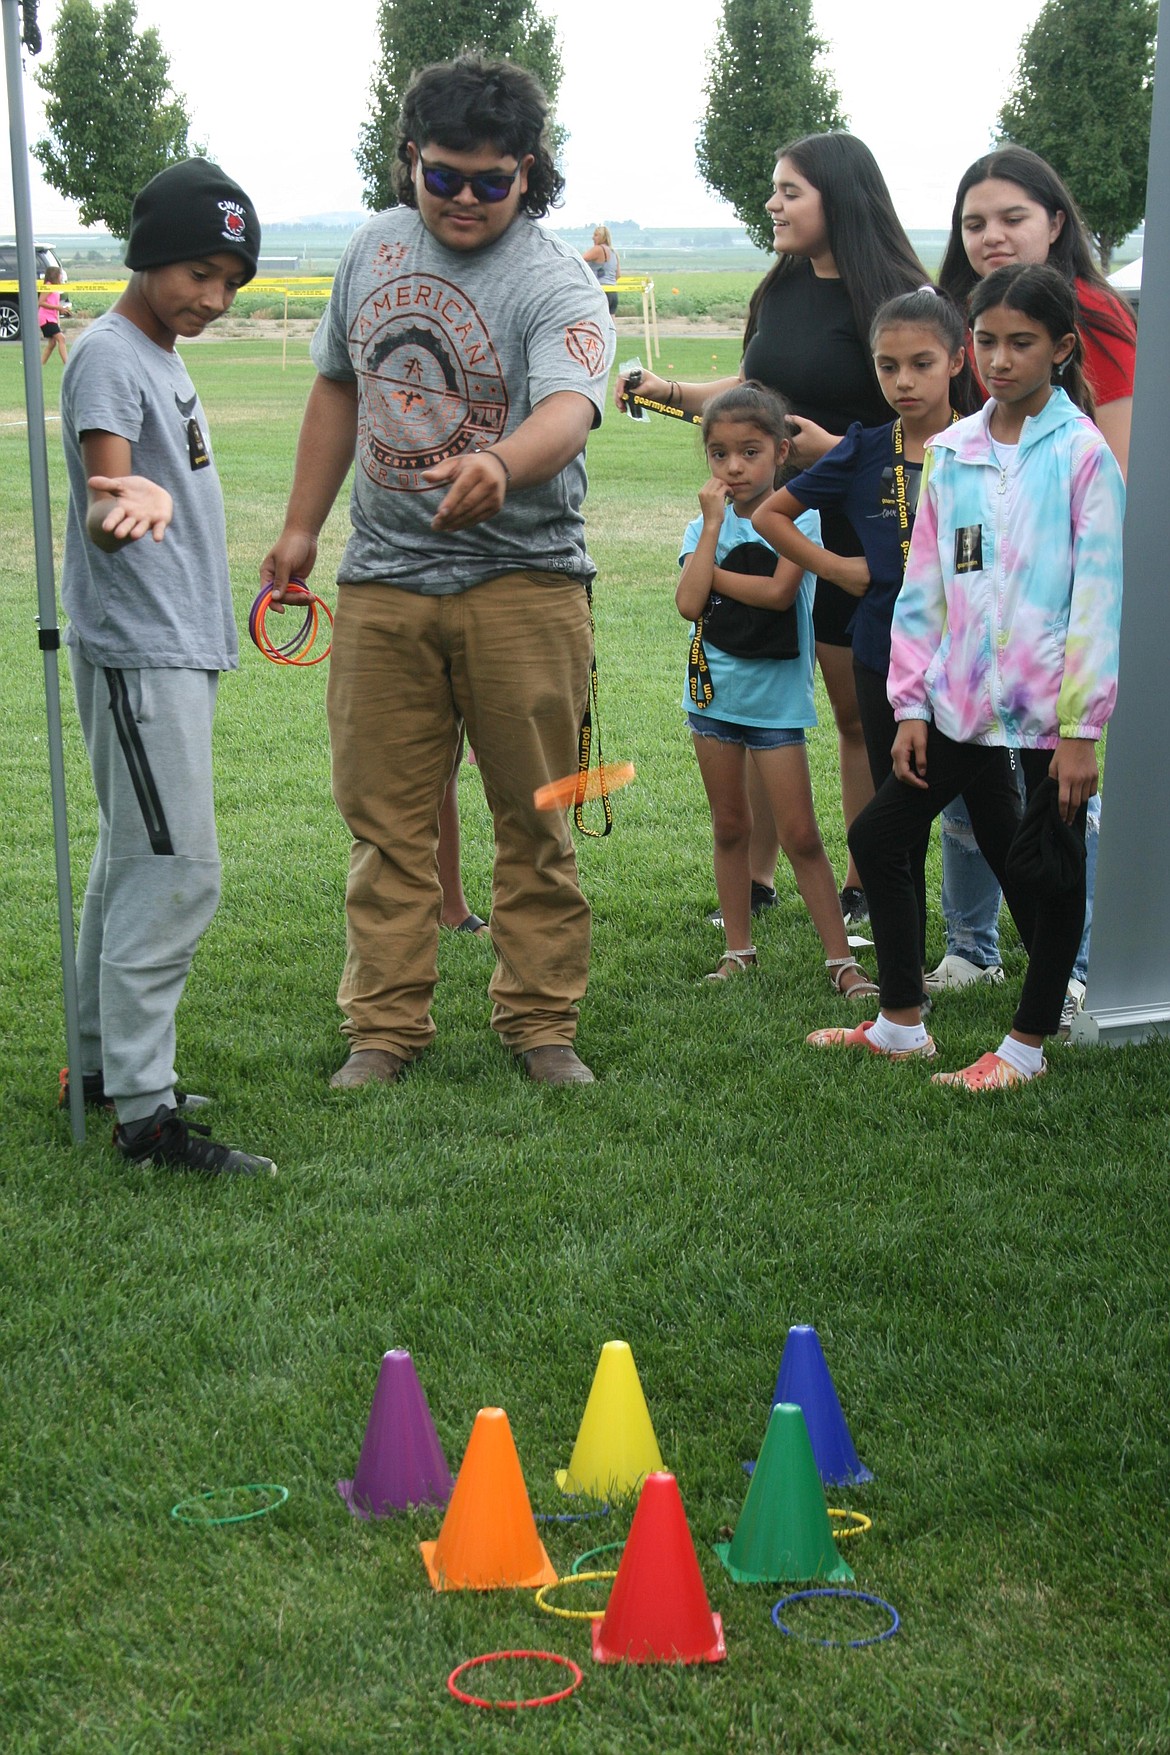 Jonathan Hernandez tries to beat the ring toss game at National Night Out in Quincy.